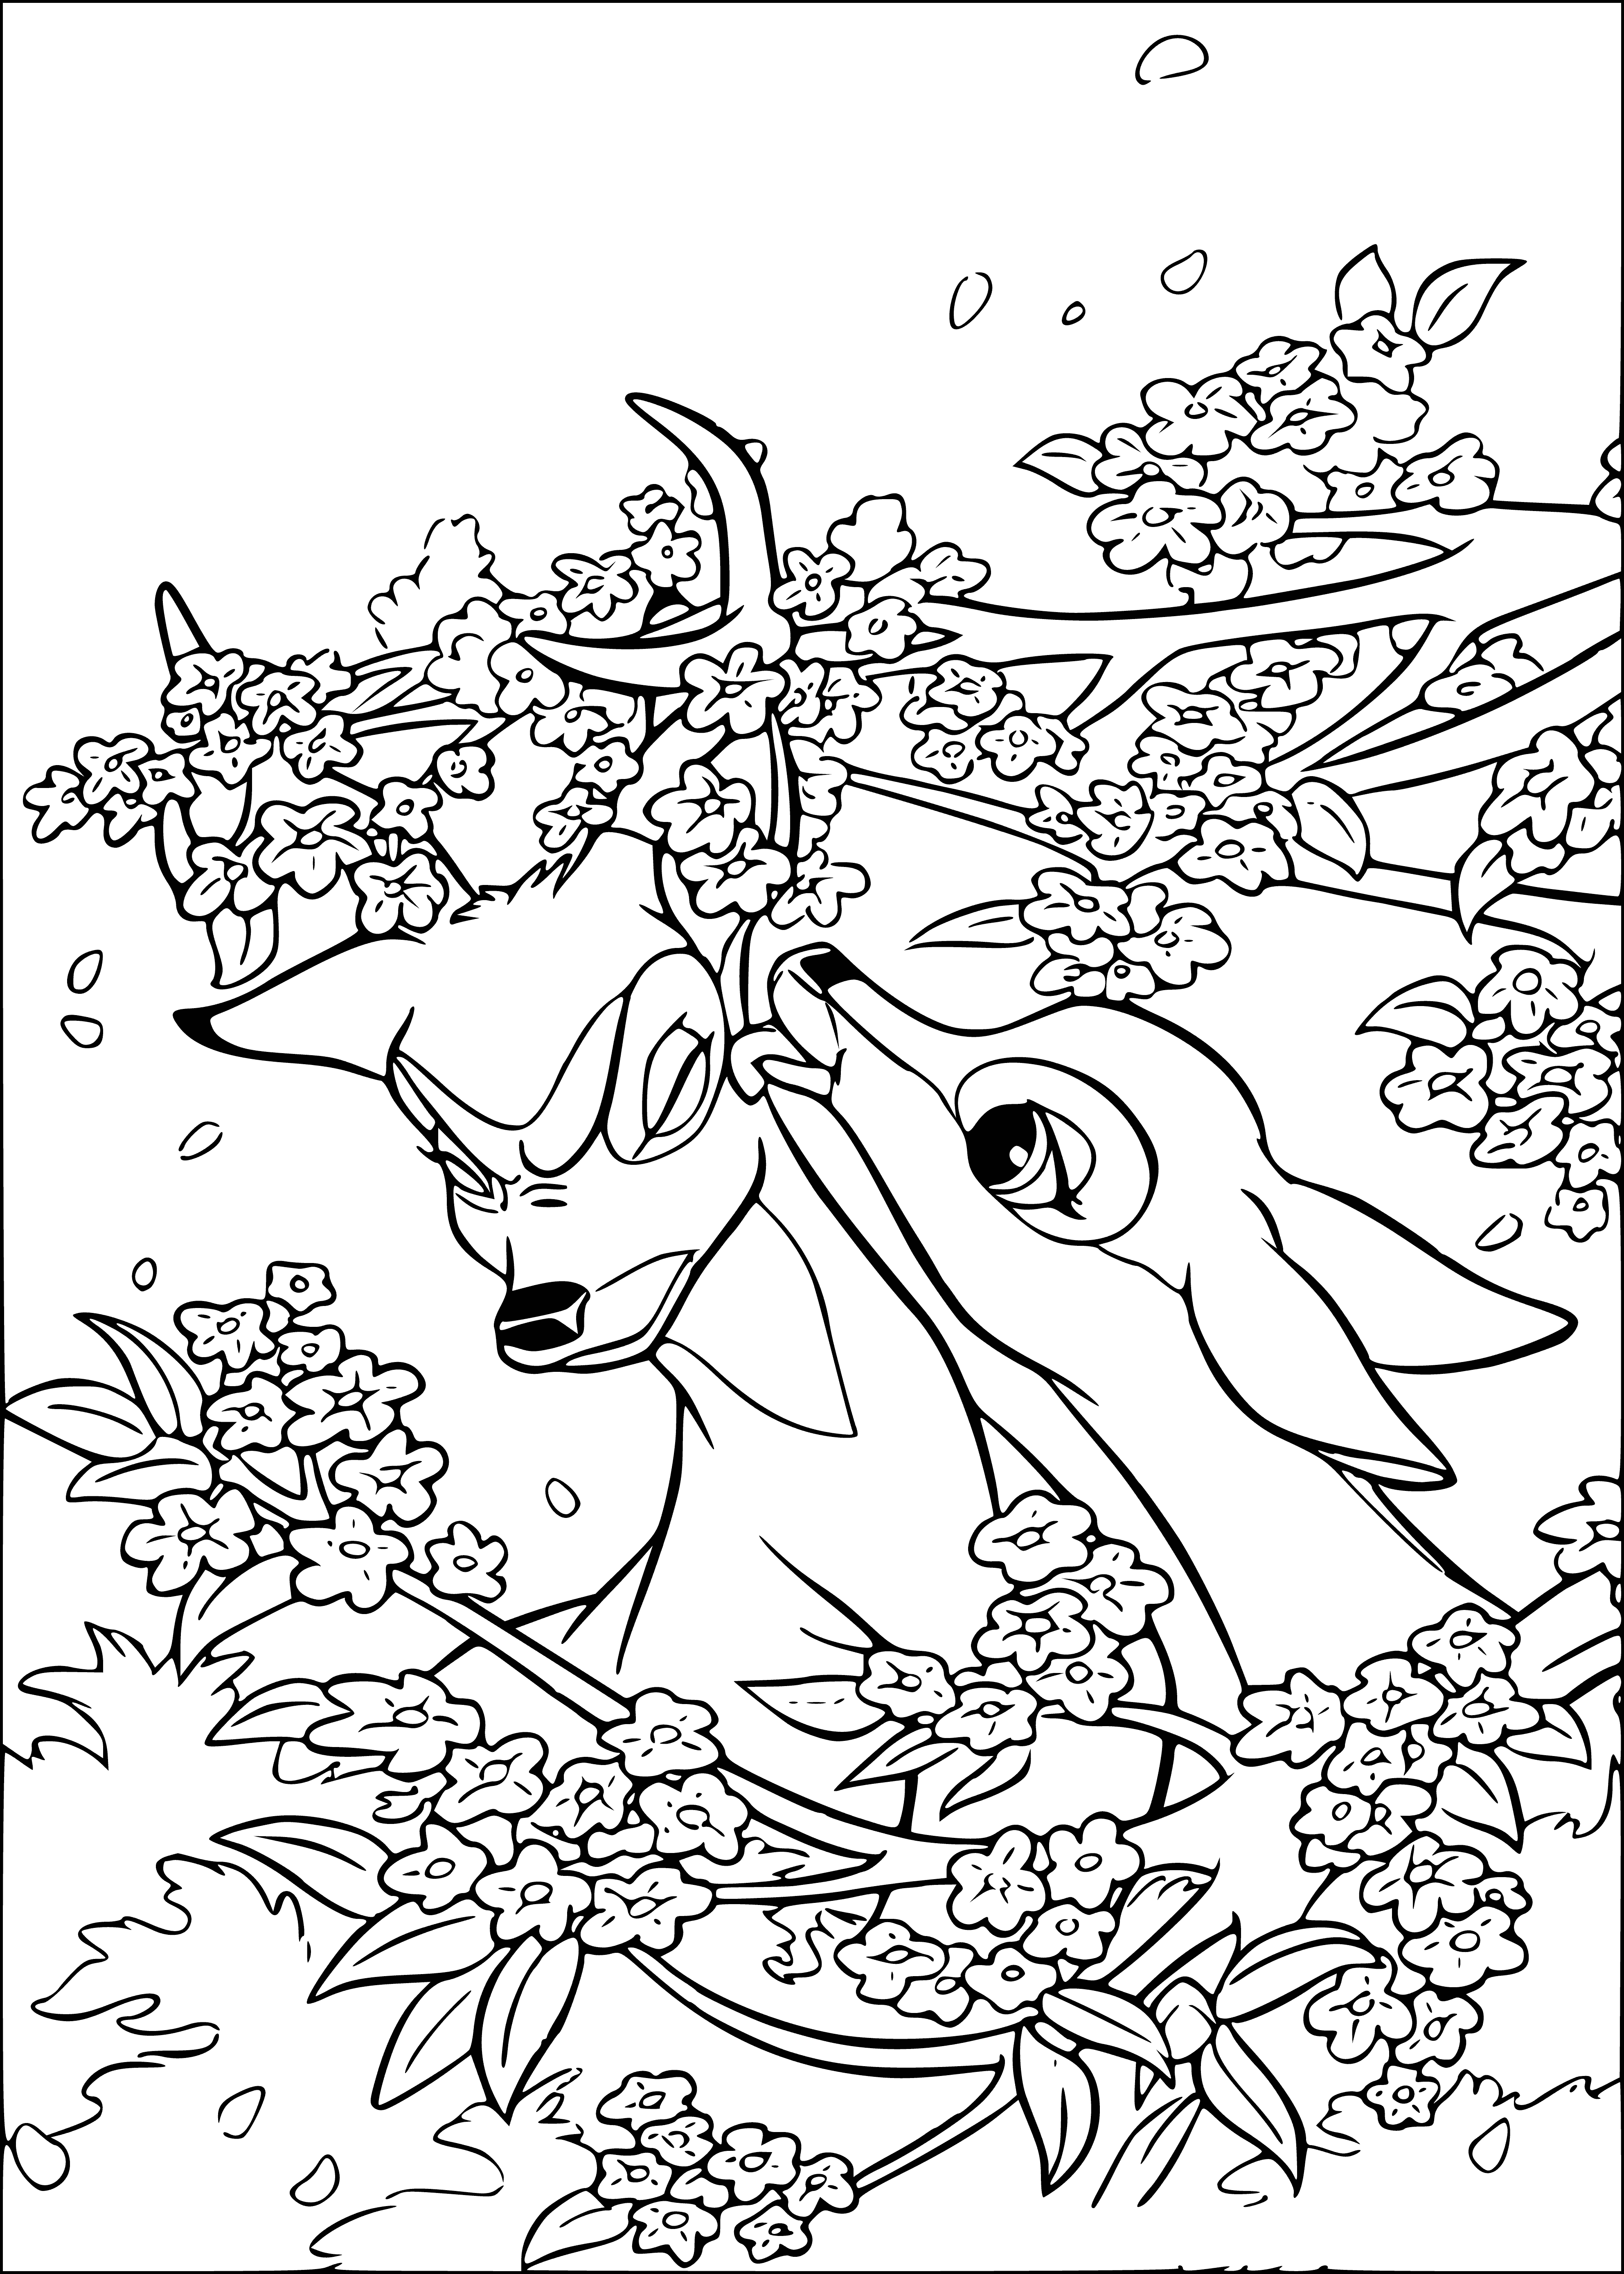 coloring page: Two deer embrace, happy and united despite their color differences. #friendship